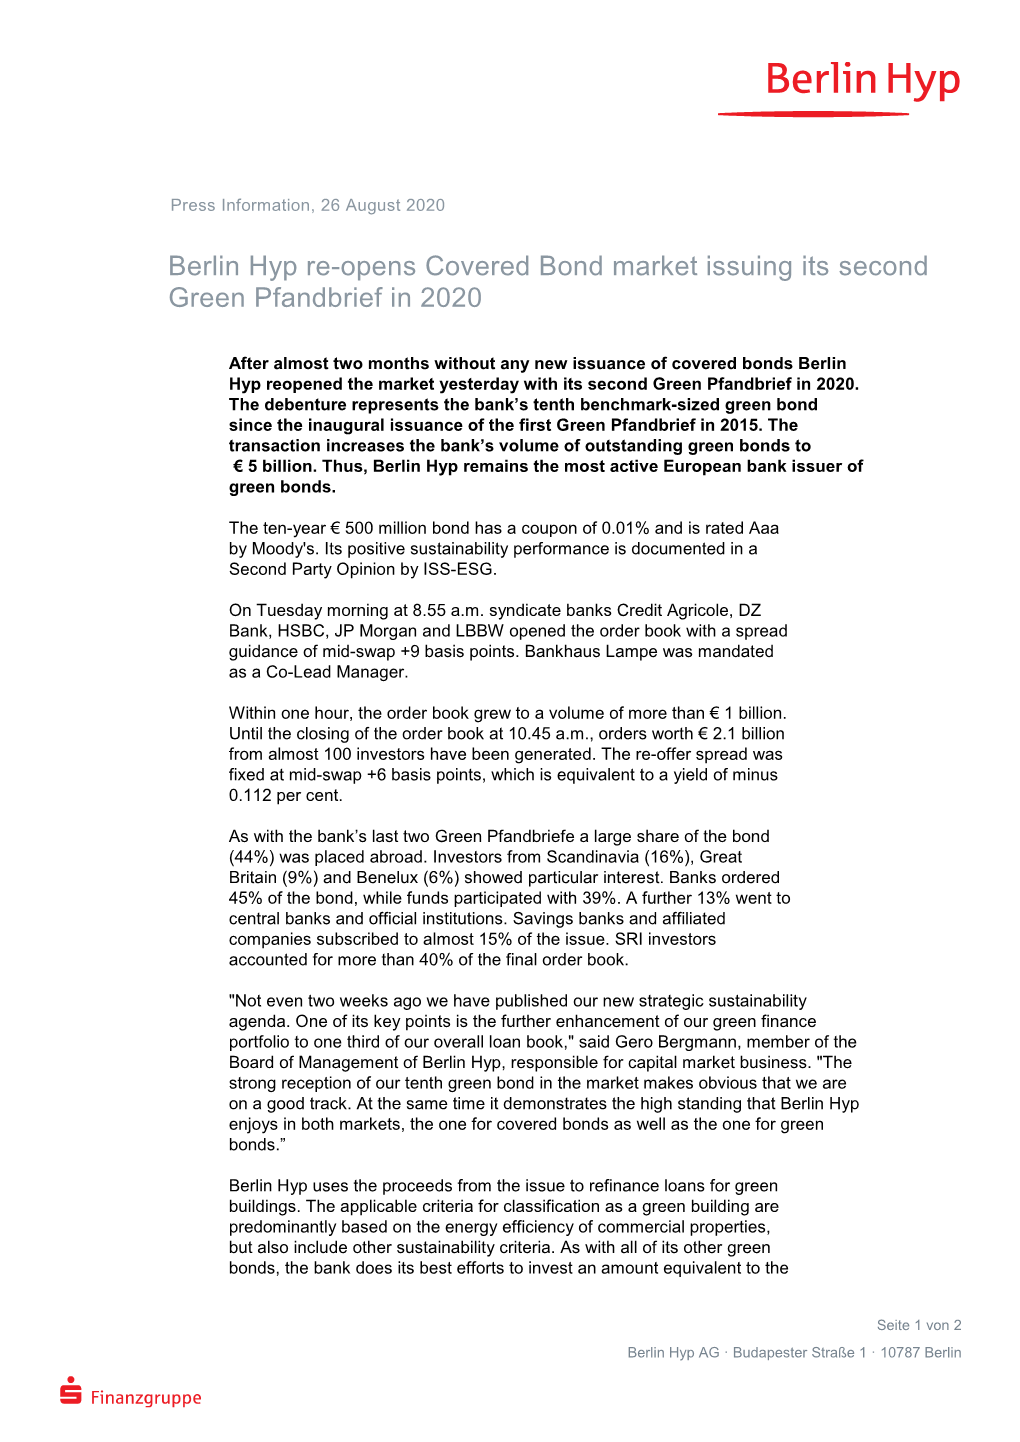 Berlin Hyp Re-Opens Covered Bond Market Issuing Its Second Green Pfandbrief in 2020